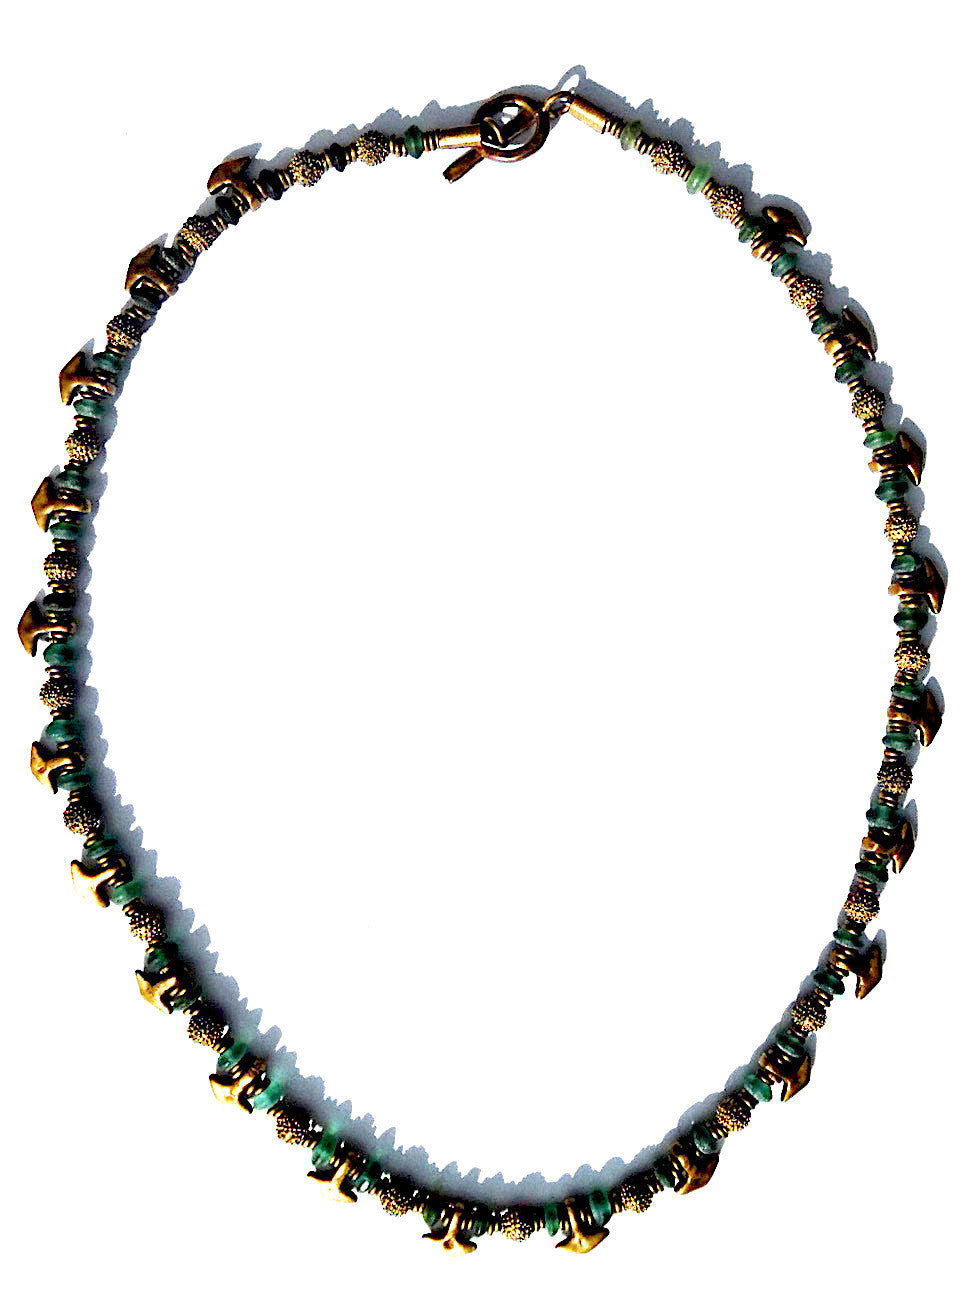 Necklace Tourmaline And Vintage African Brass Ooloo